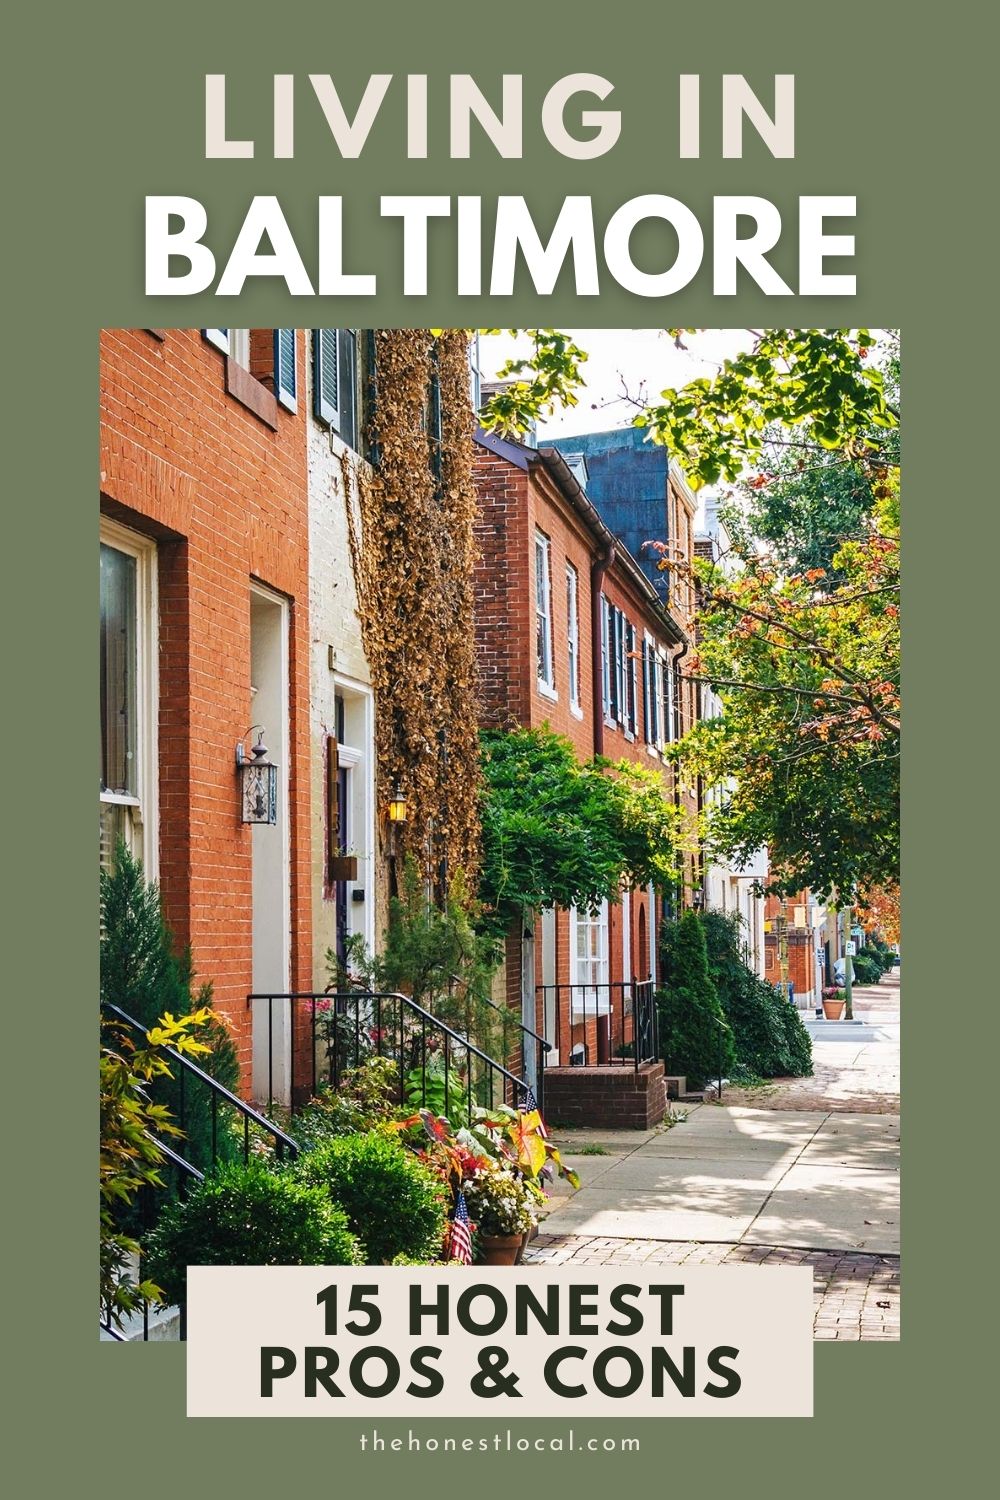 Pros and cons of living in Baltimore